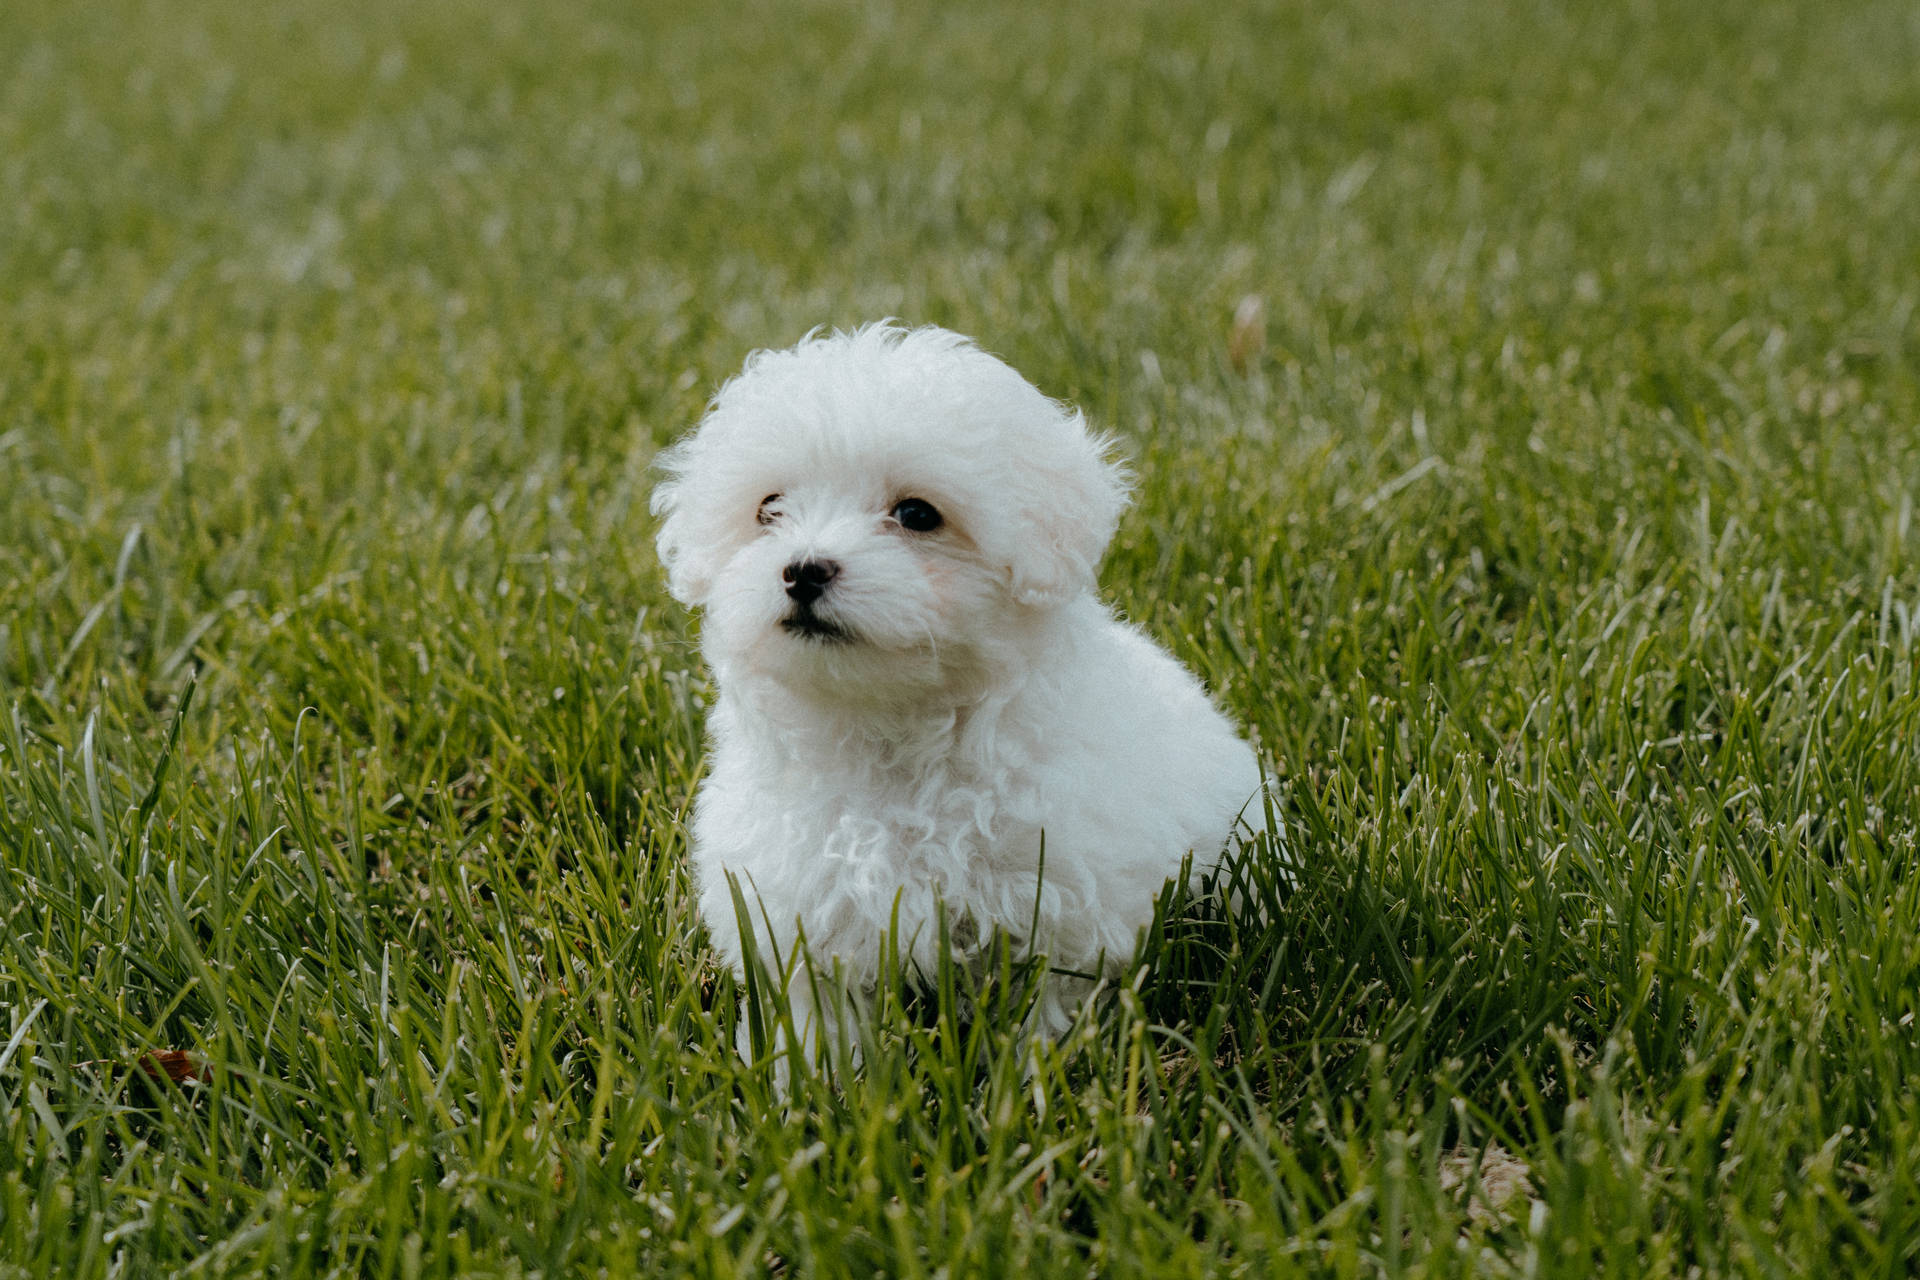 White Teacup Poodle On Grass